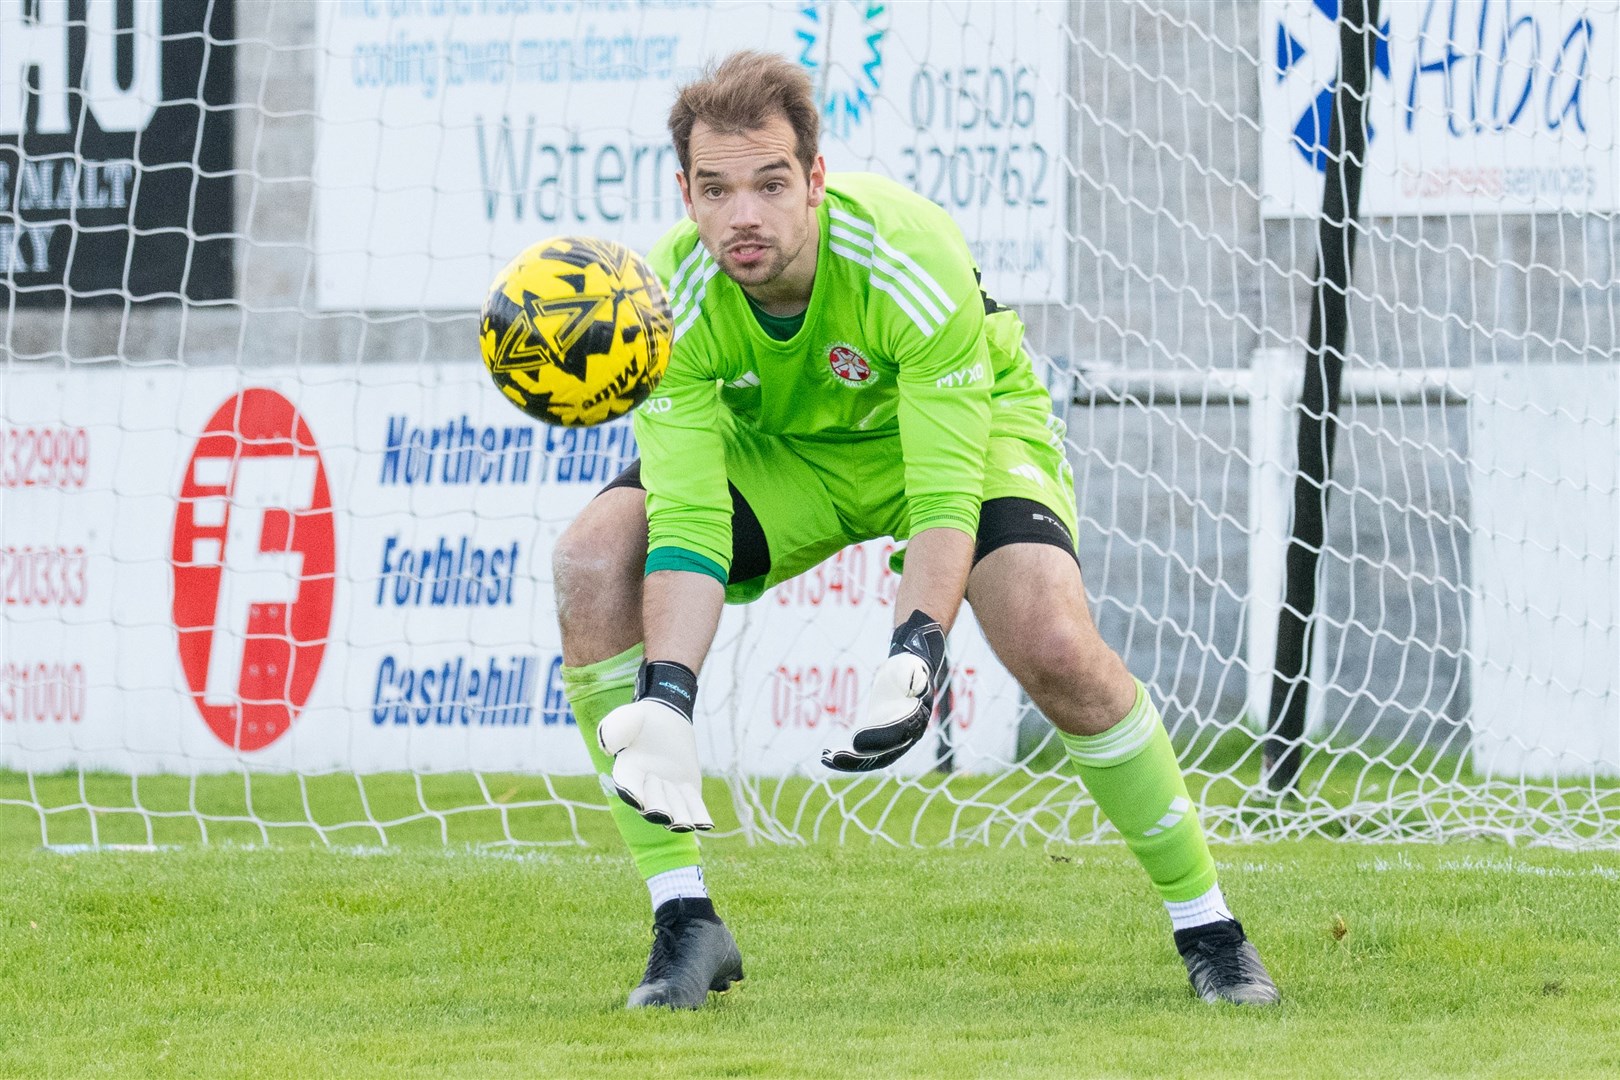 Cammy Farquhar had some good saves for Lossiemouth. Picture: Daniel Forsyth